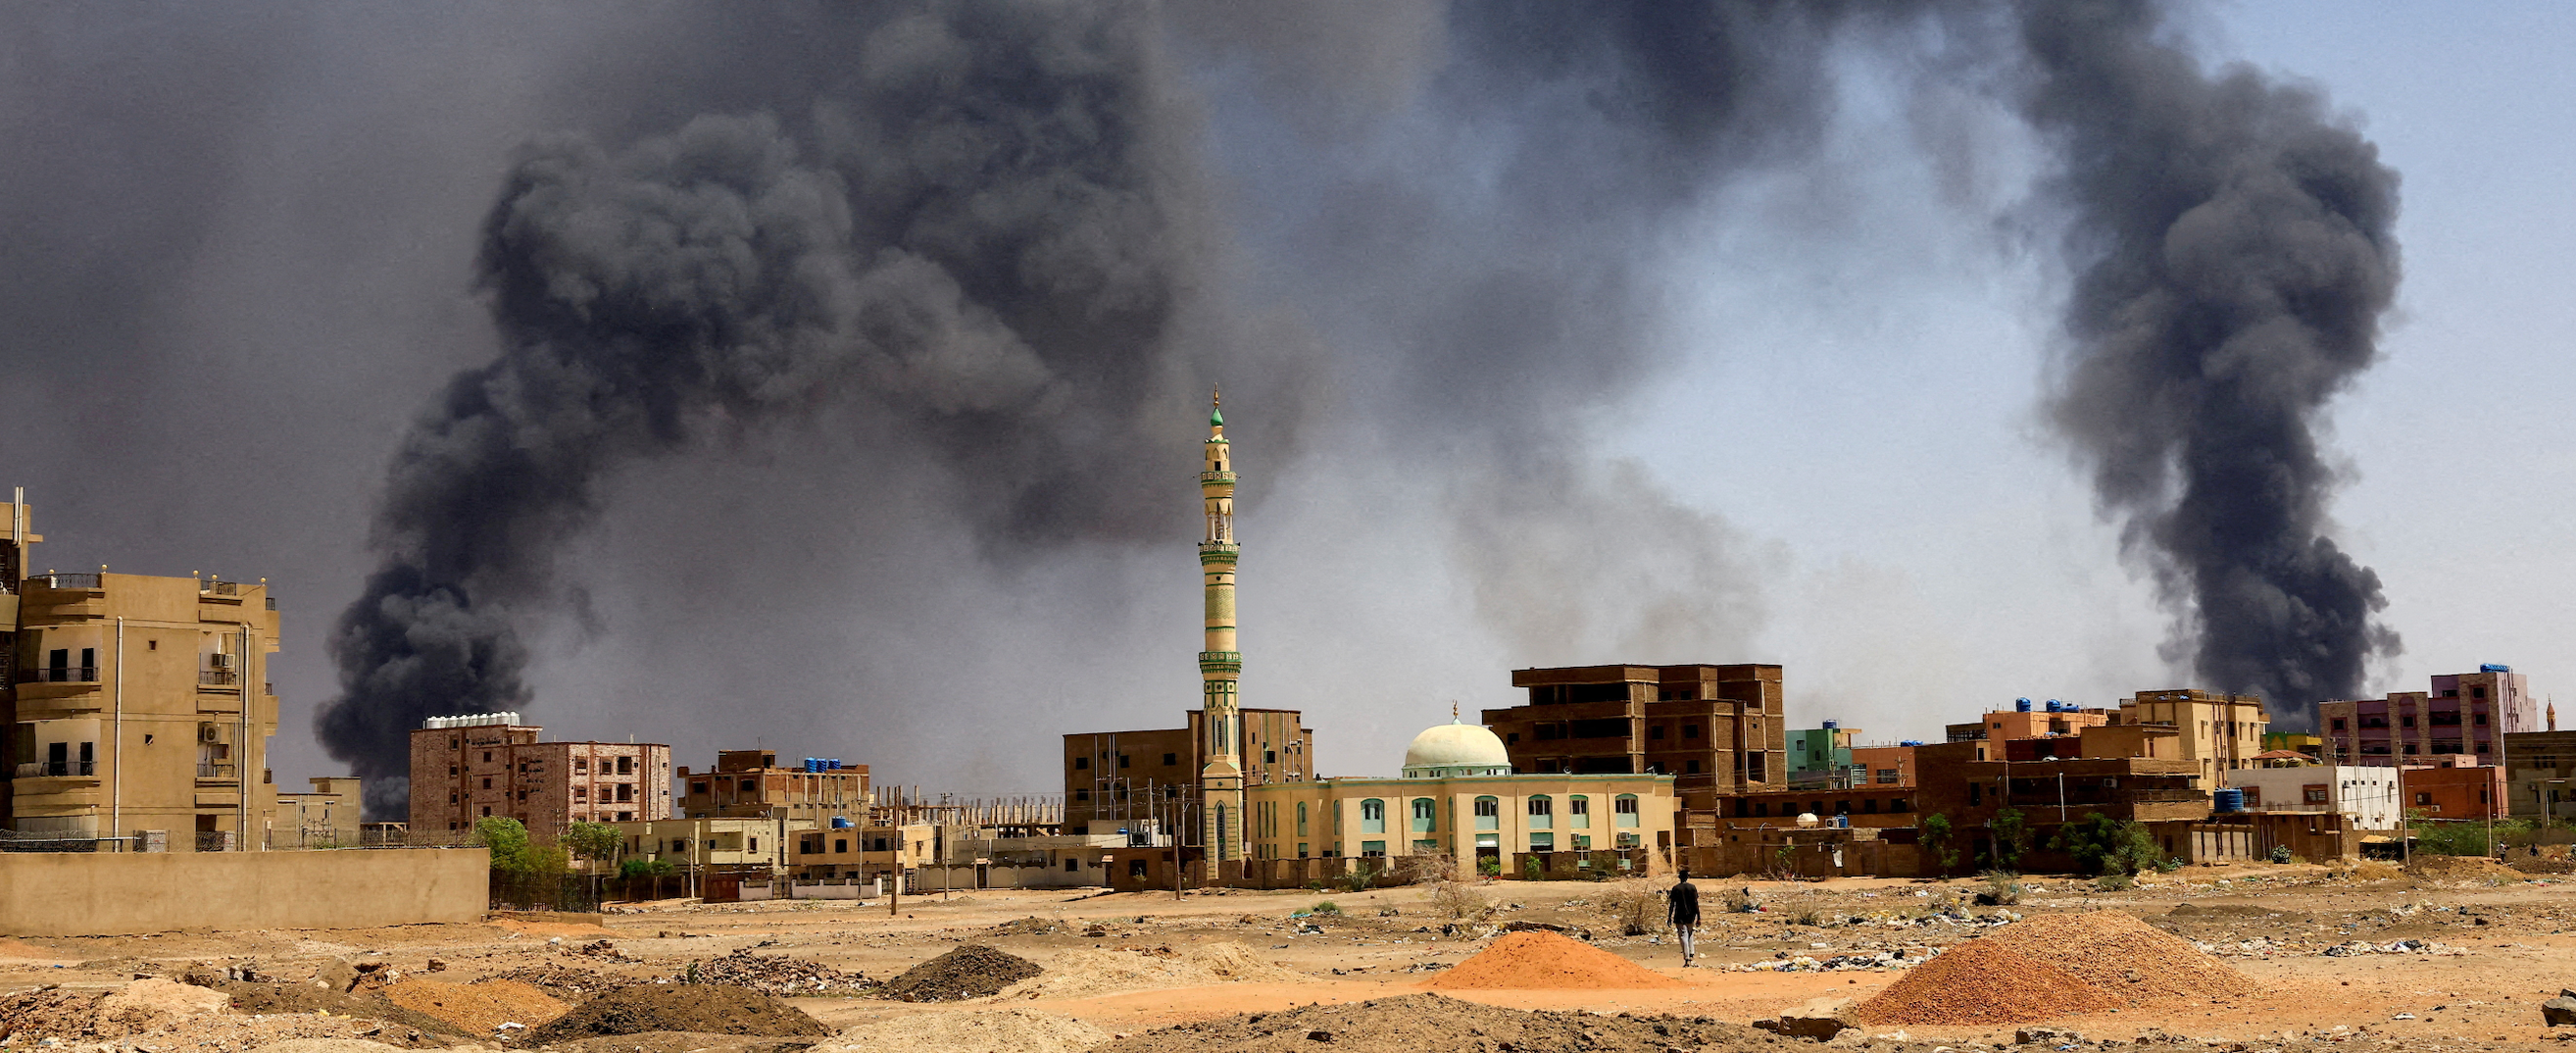 A man walks while smoke rises above buildings after aerial bombardment, during clashes between the paramilitary Rapid Support Forces and the army in Khartoum North, Sudan, May 1, 2023